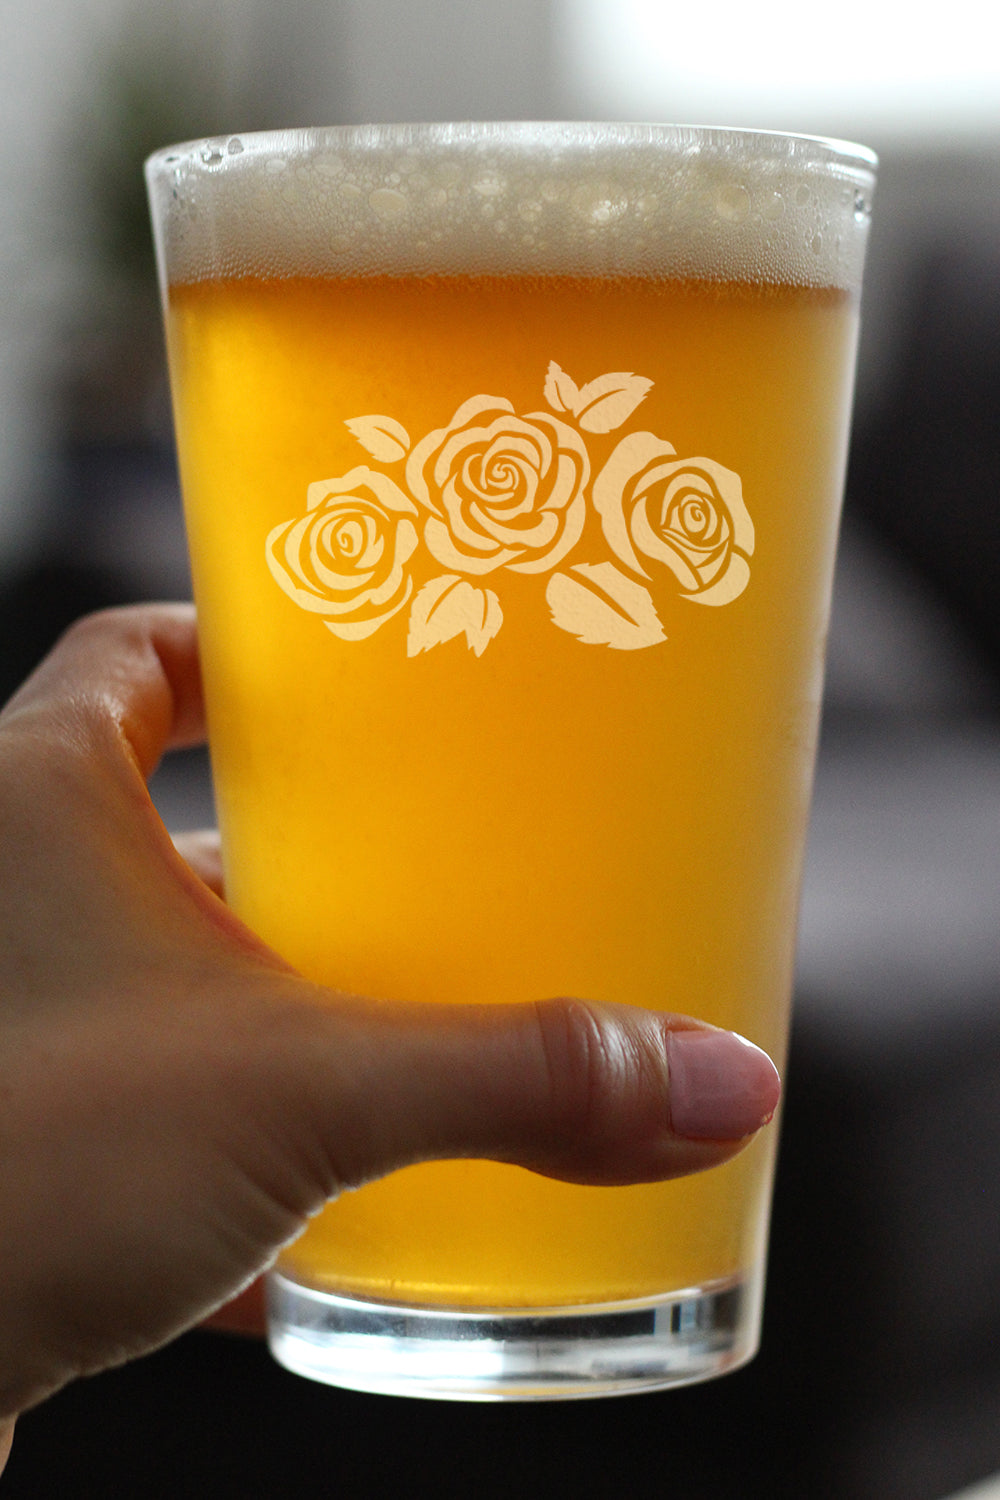 Roses - 16 Ounce Pint Glass